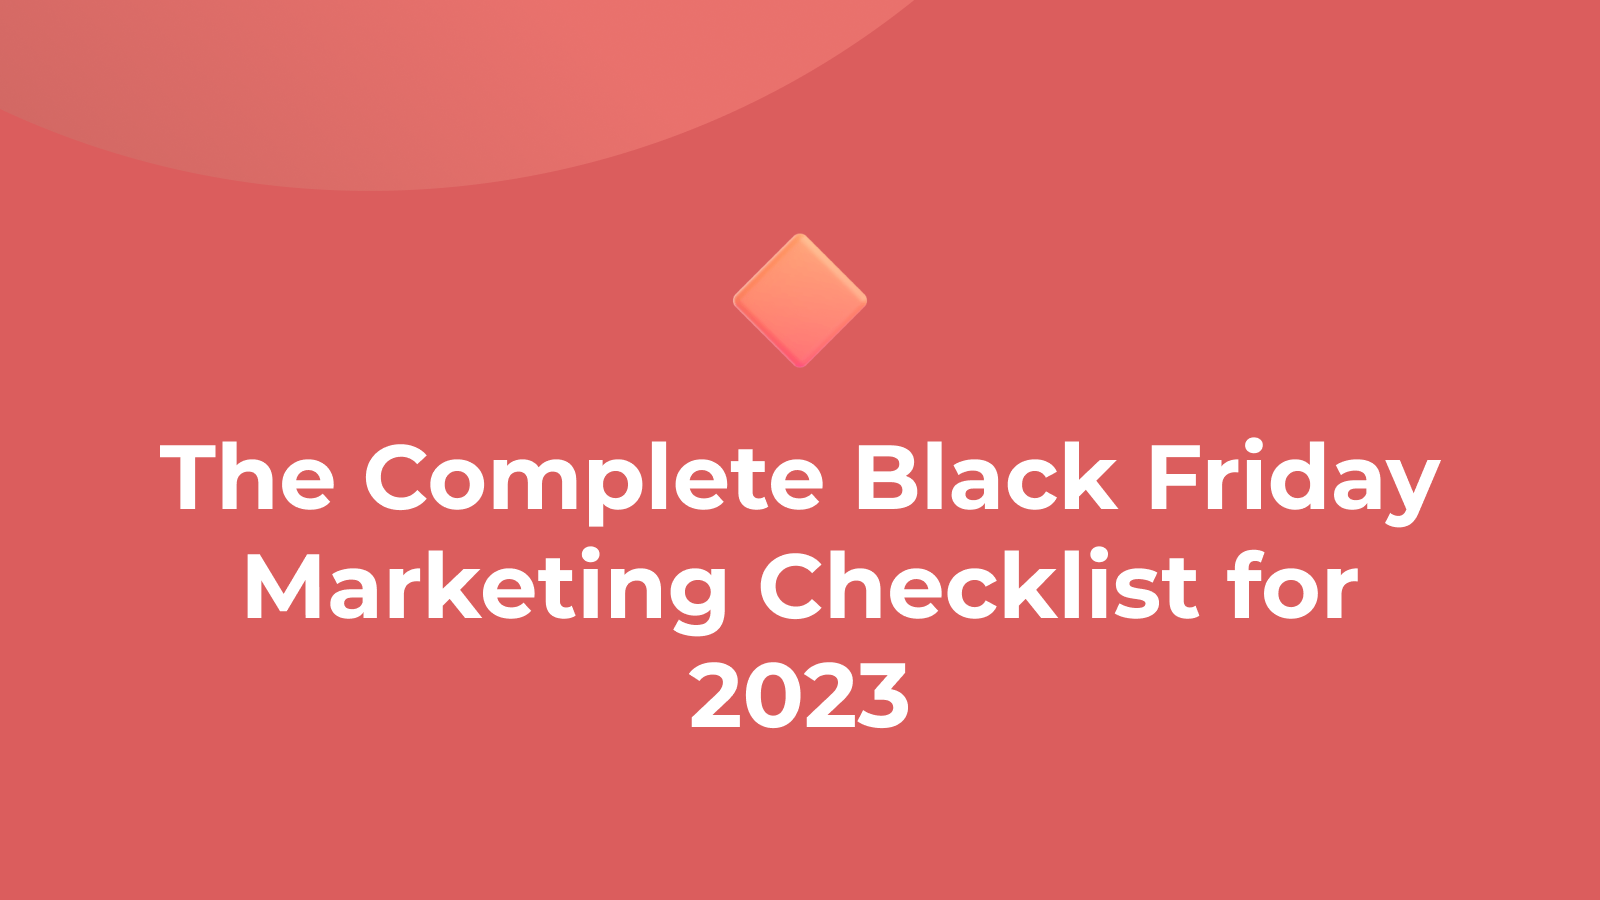 The Complete Black Friday Marketing Checklist for 2023